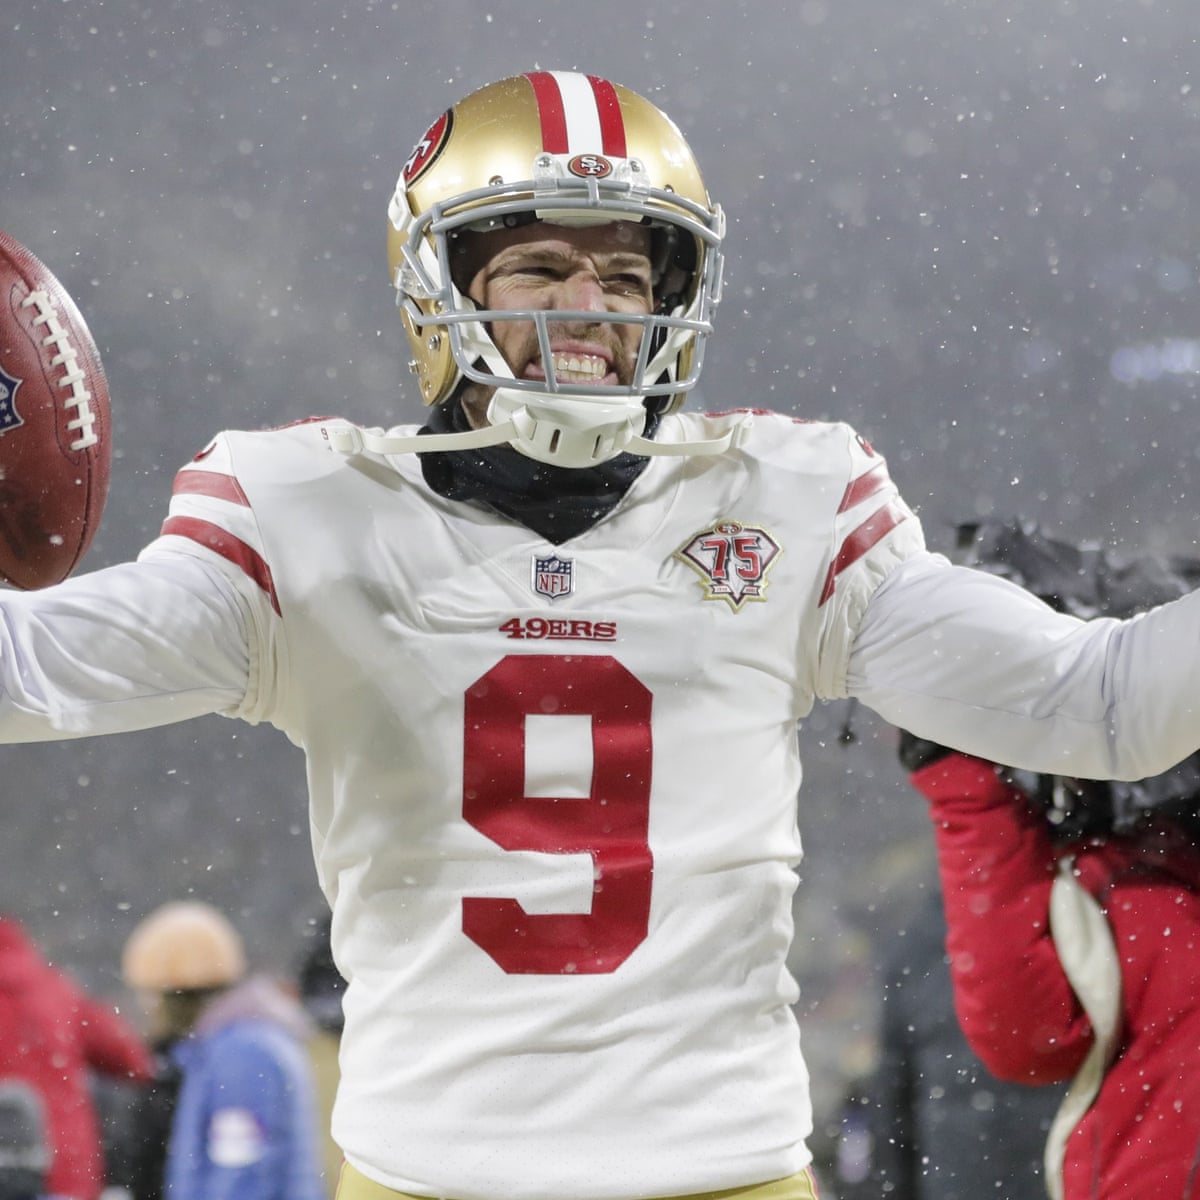 NFL playoffs in tatters as 49ers shock Packers and Bengals topple Titans, NFL